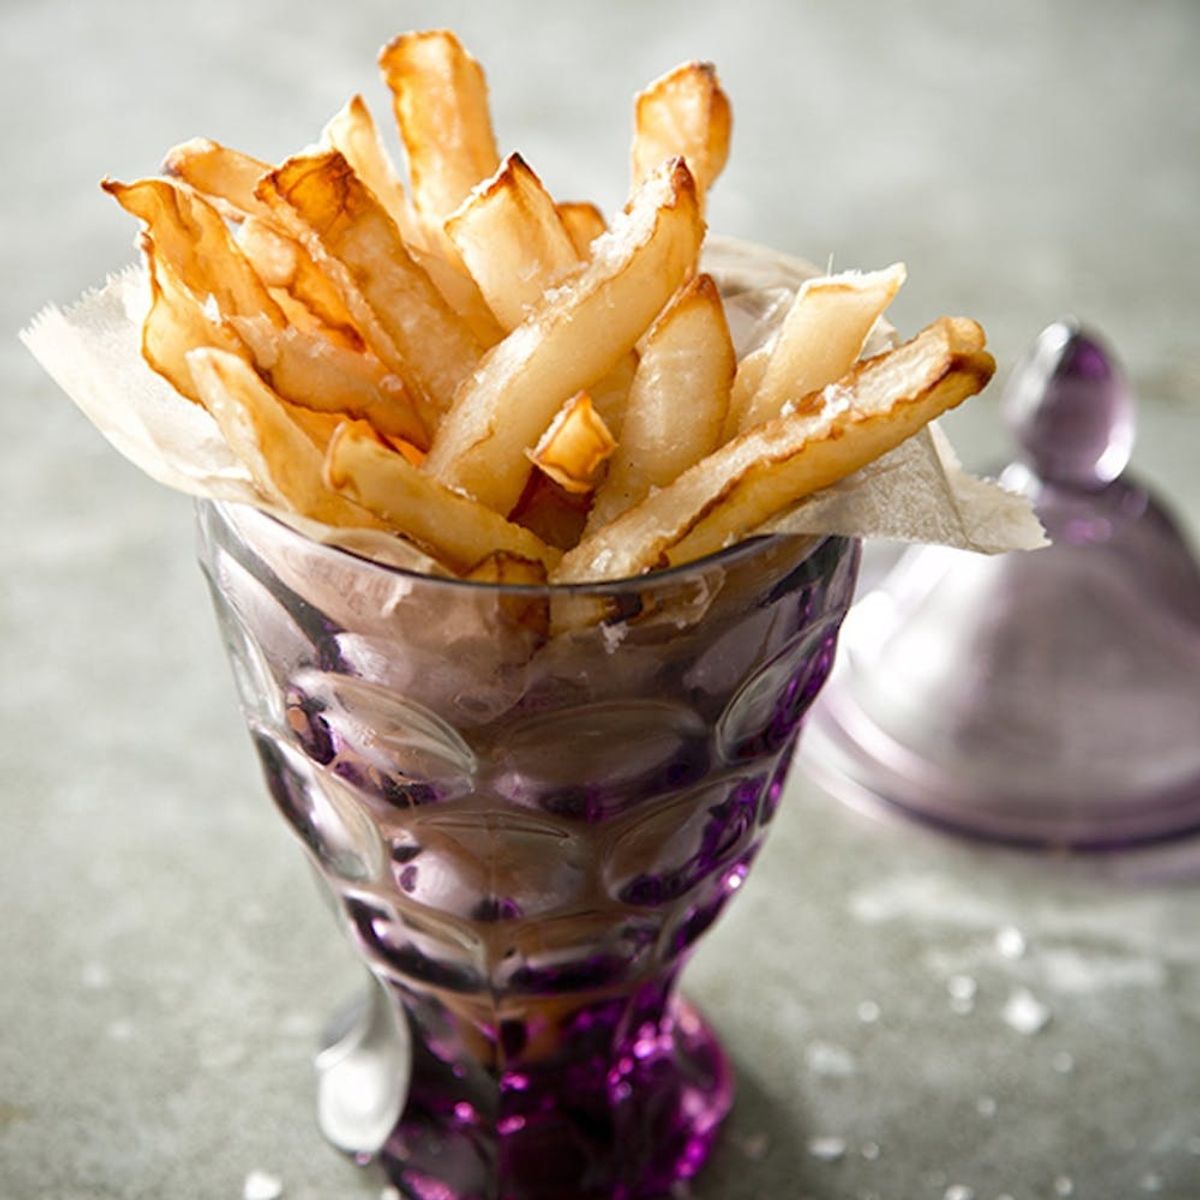 11 Veggies You Never Knew You Could Make into Fries